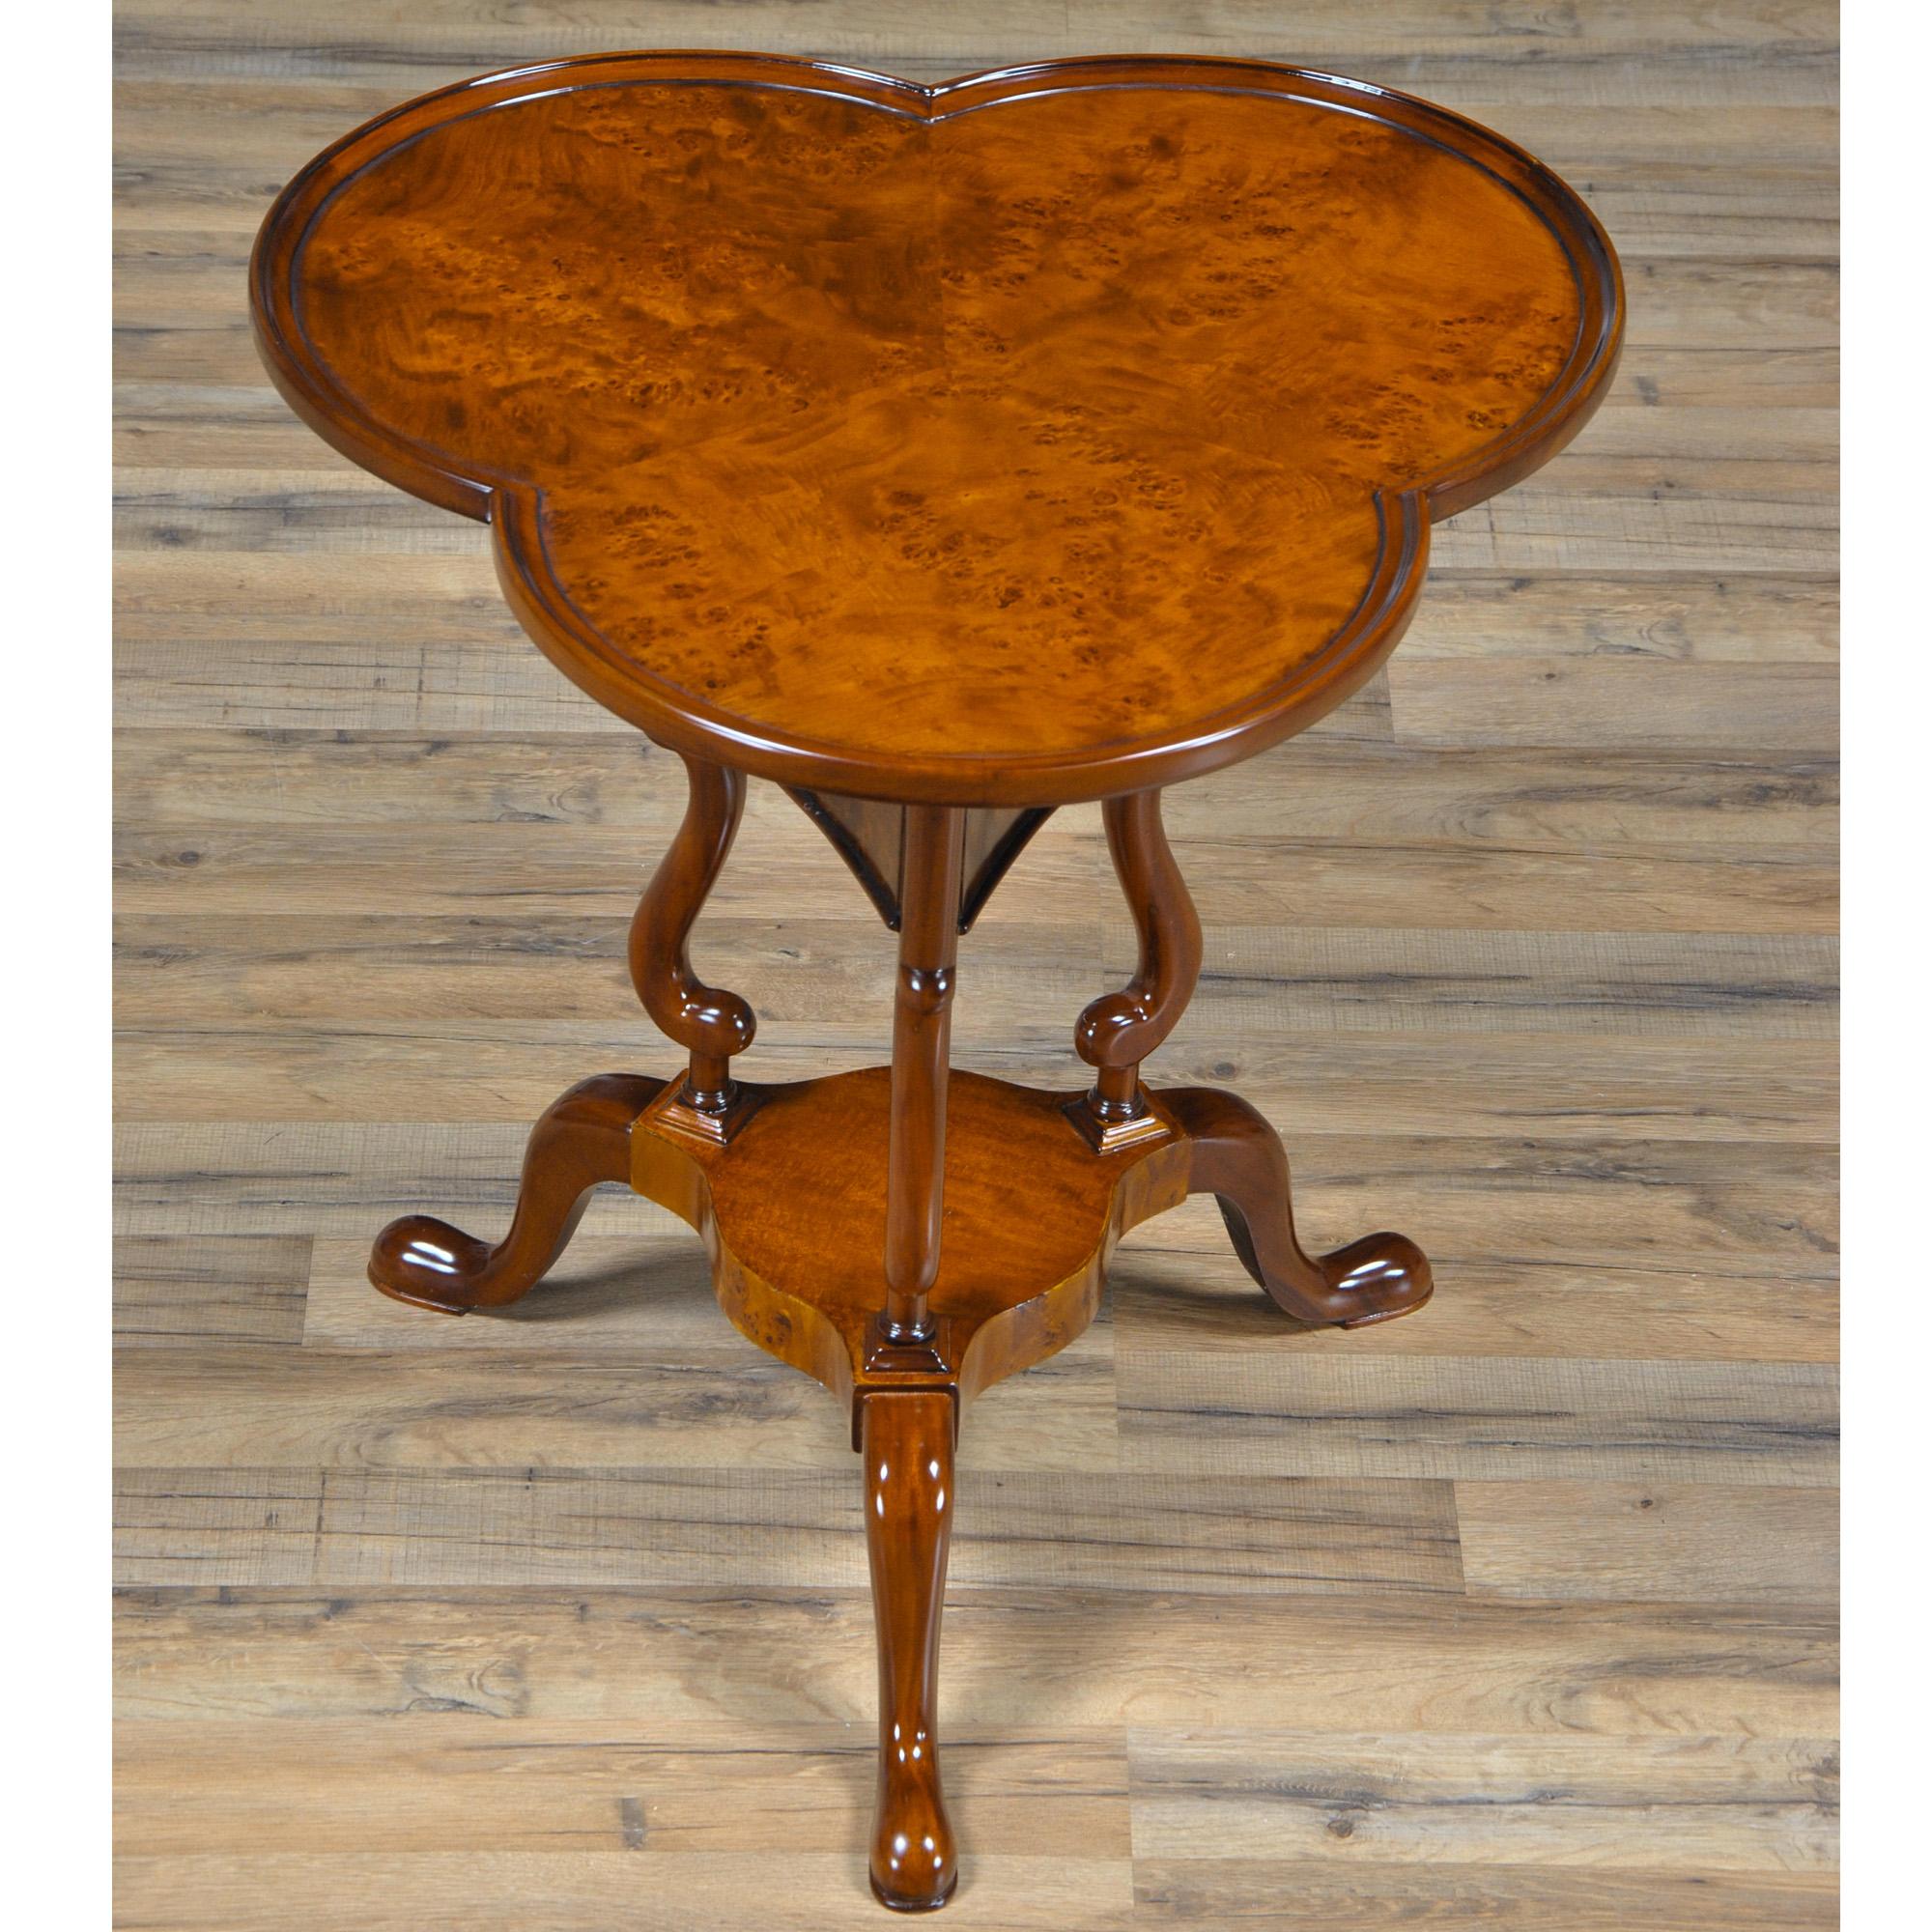 A high quality, clover top shaped Burled Clover Table produced by Niagara Furniture. Also traditionally referred to as a wine table. Beautifully shaped and presented top, supported by curved and shaped supports and resting on three solid mahogany